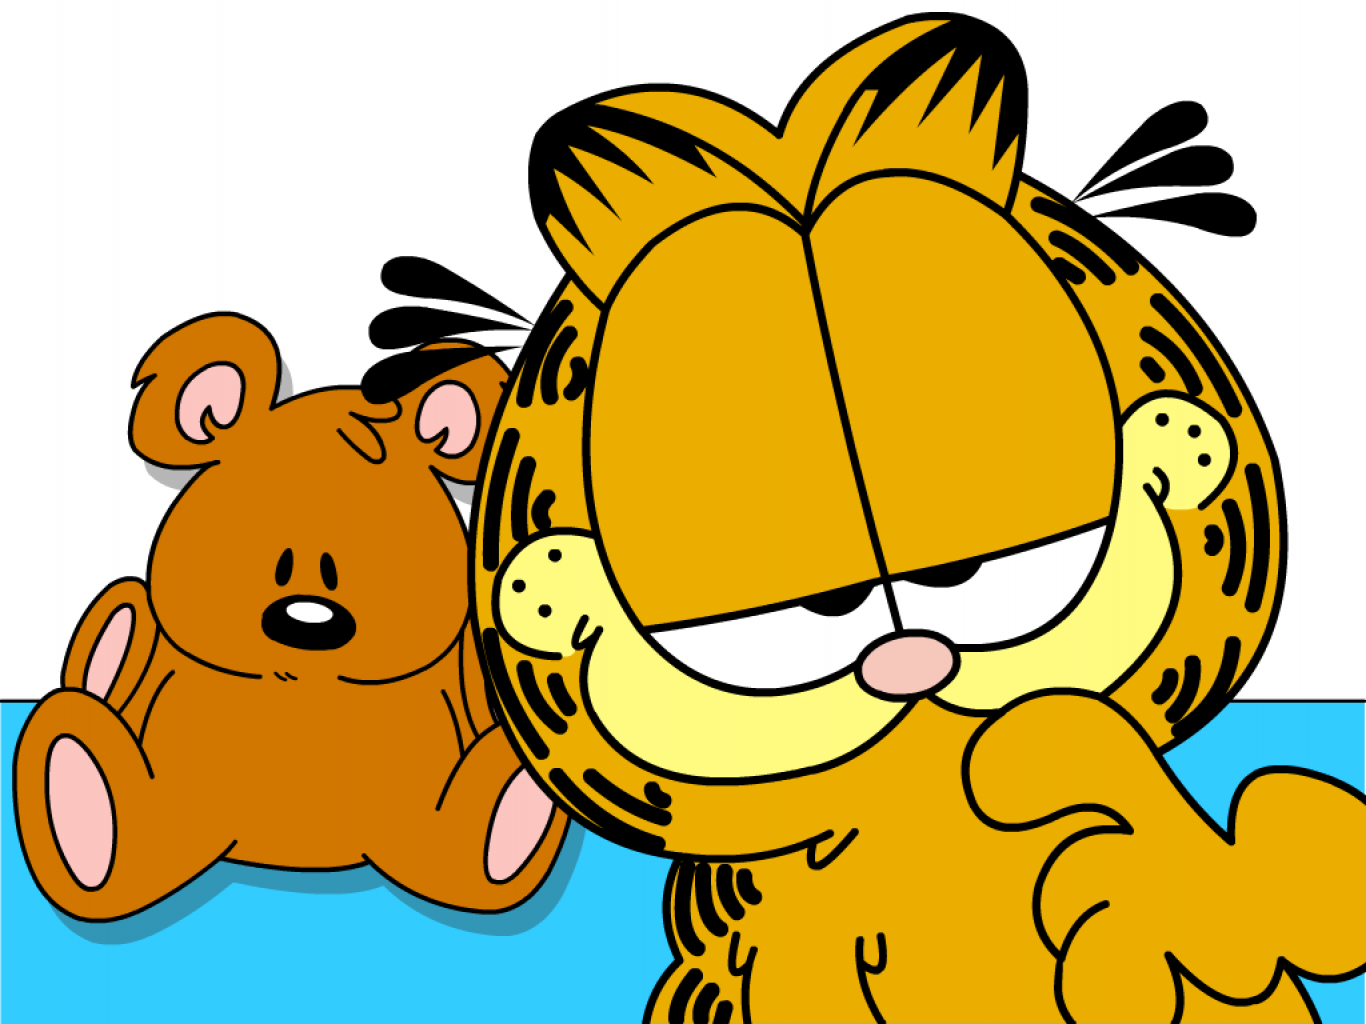 Garfield Image Collection